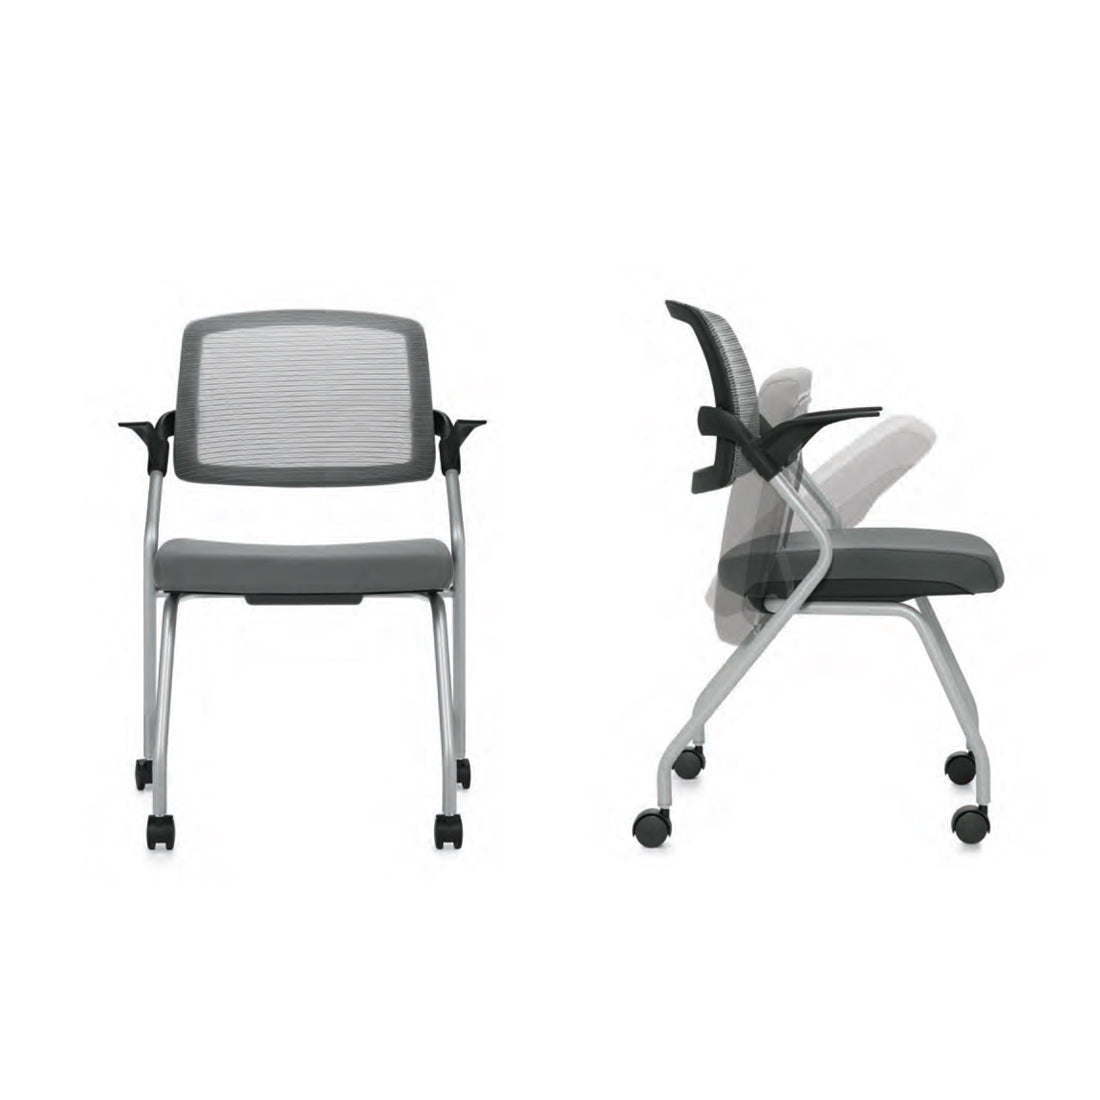 Customized Flip Up Seat Nesting Chair with Casters G6764C/6765C - Kainosbuy.com